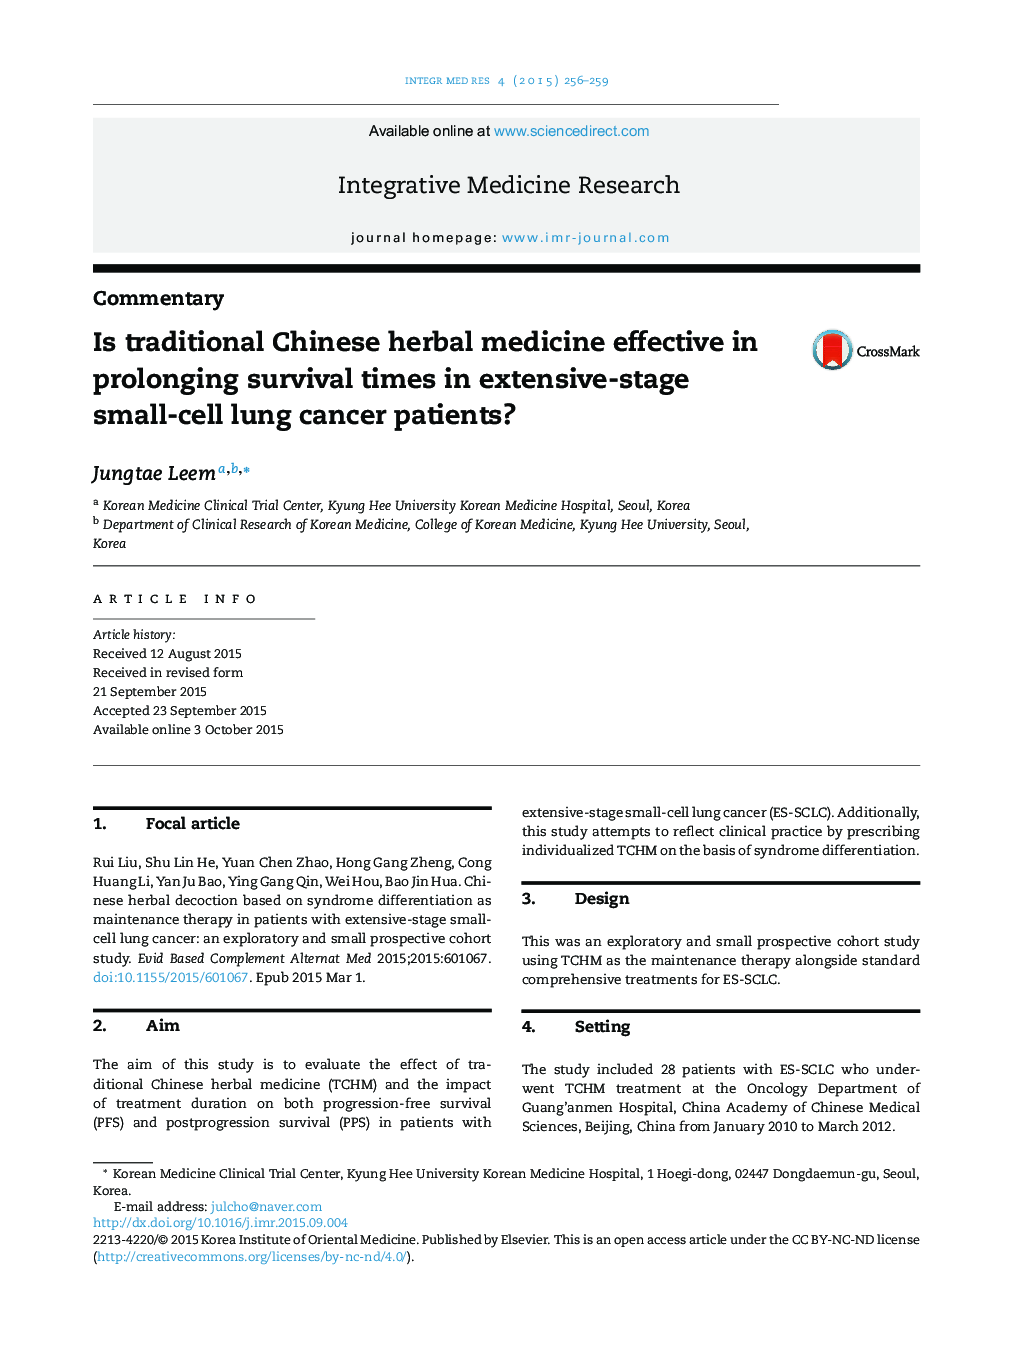 Is traditional Chinese herbal medicine effective in prolonging survival times in extensive-stage small-cell lung cancer patients?